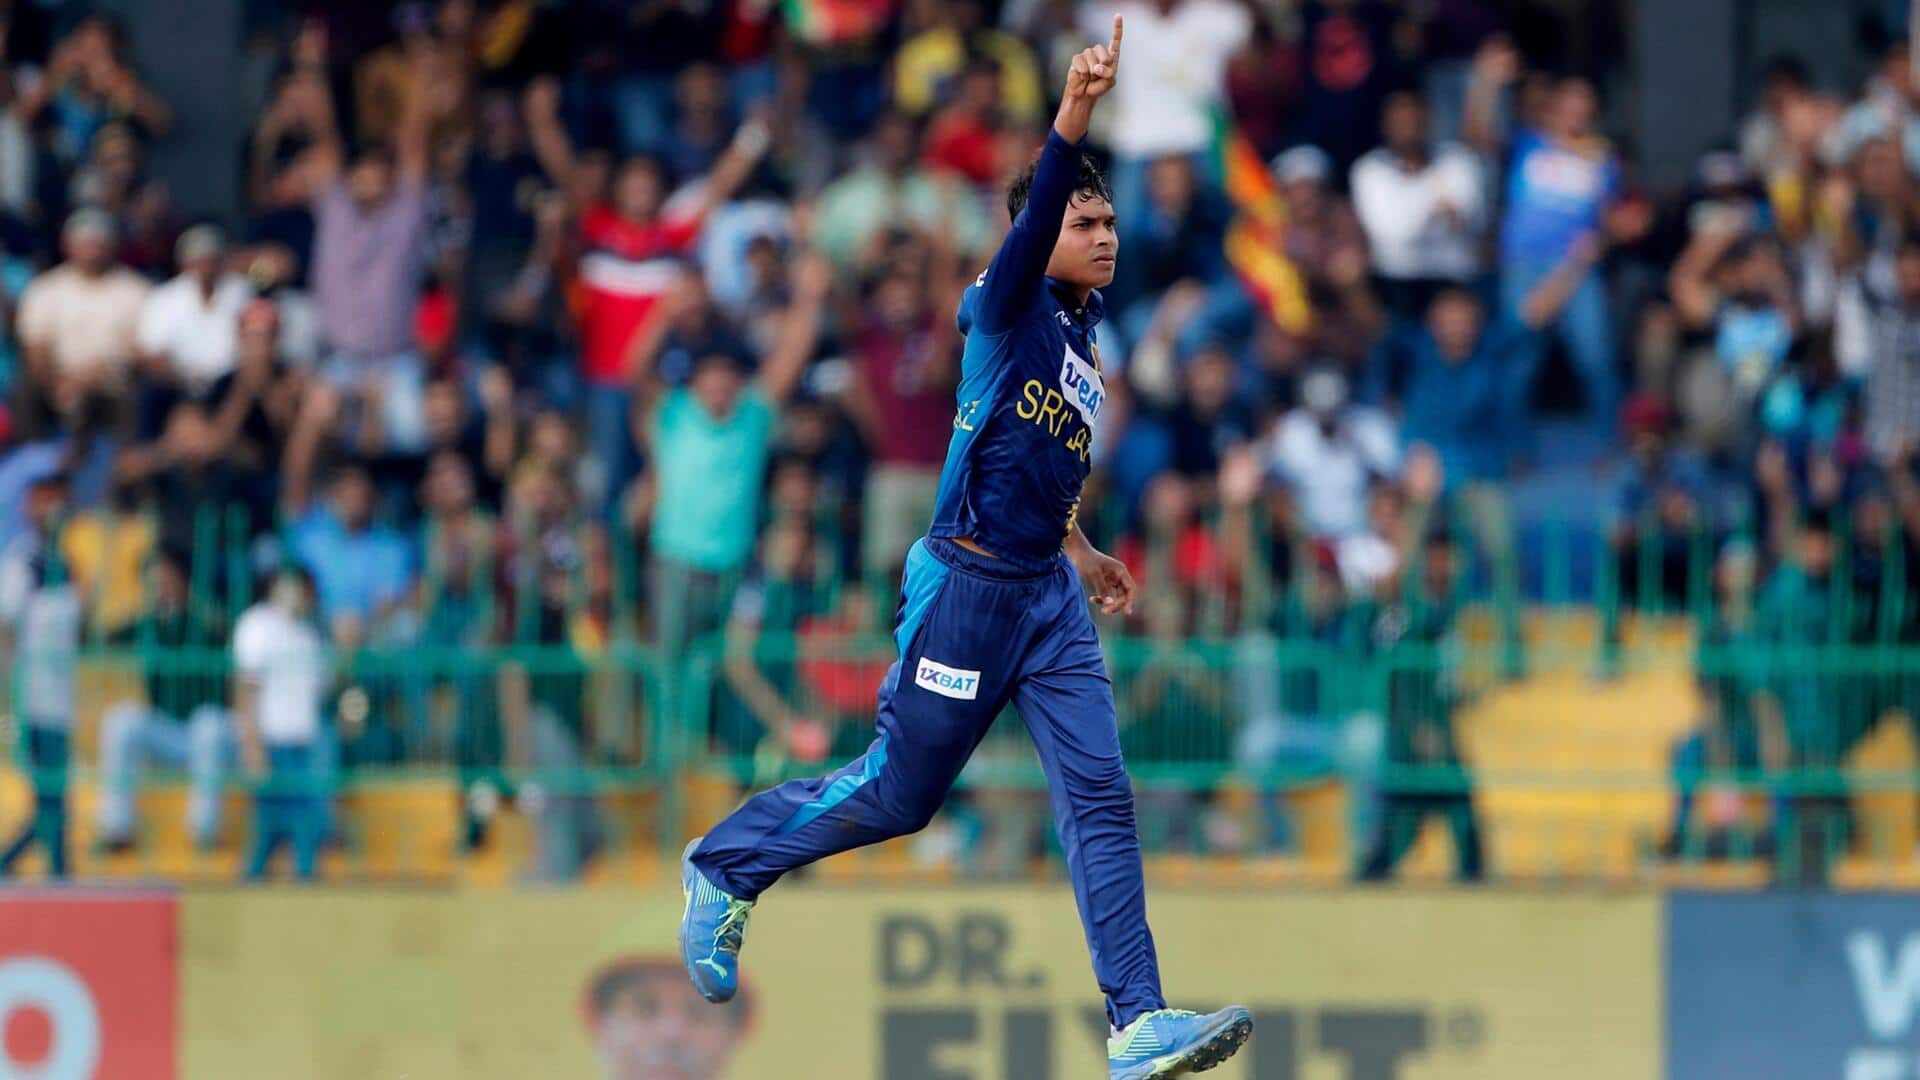 Asia Cup, Dunith Wellalage stuns India: Decoding his career stats 